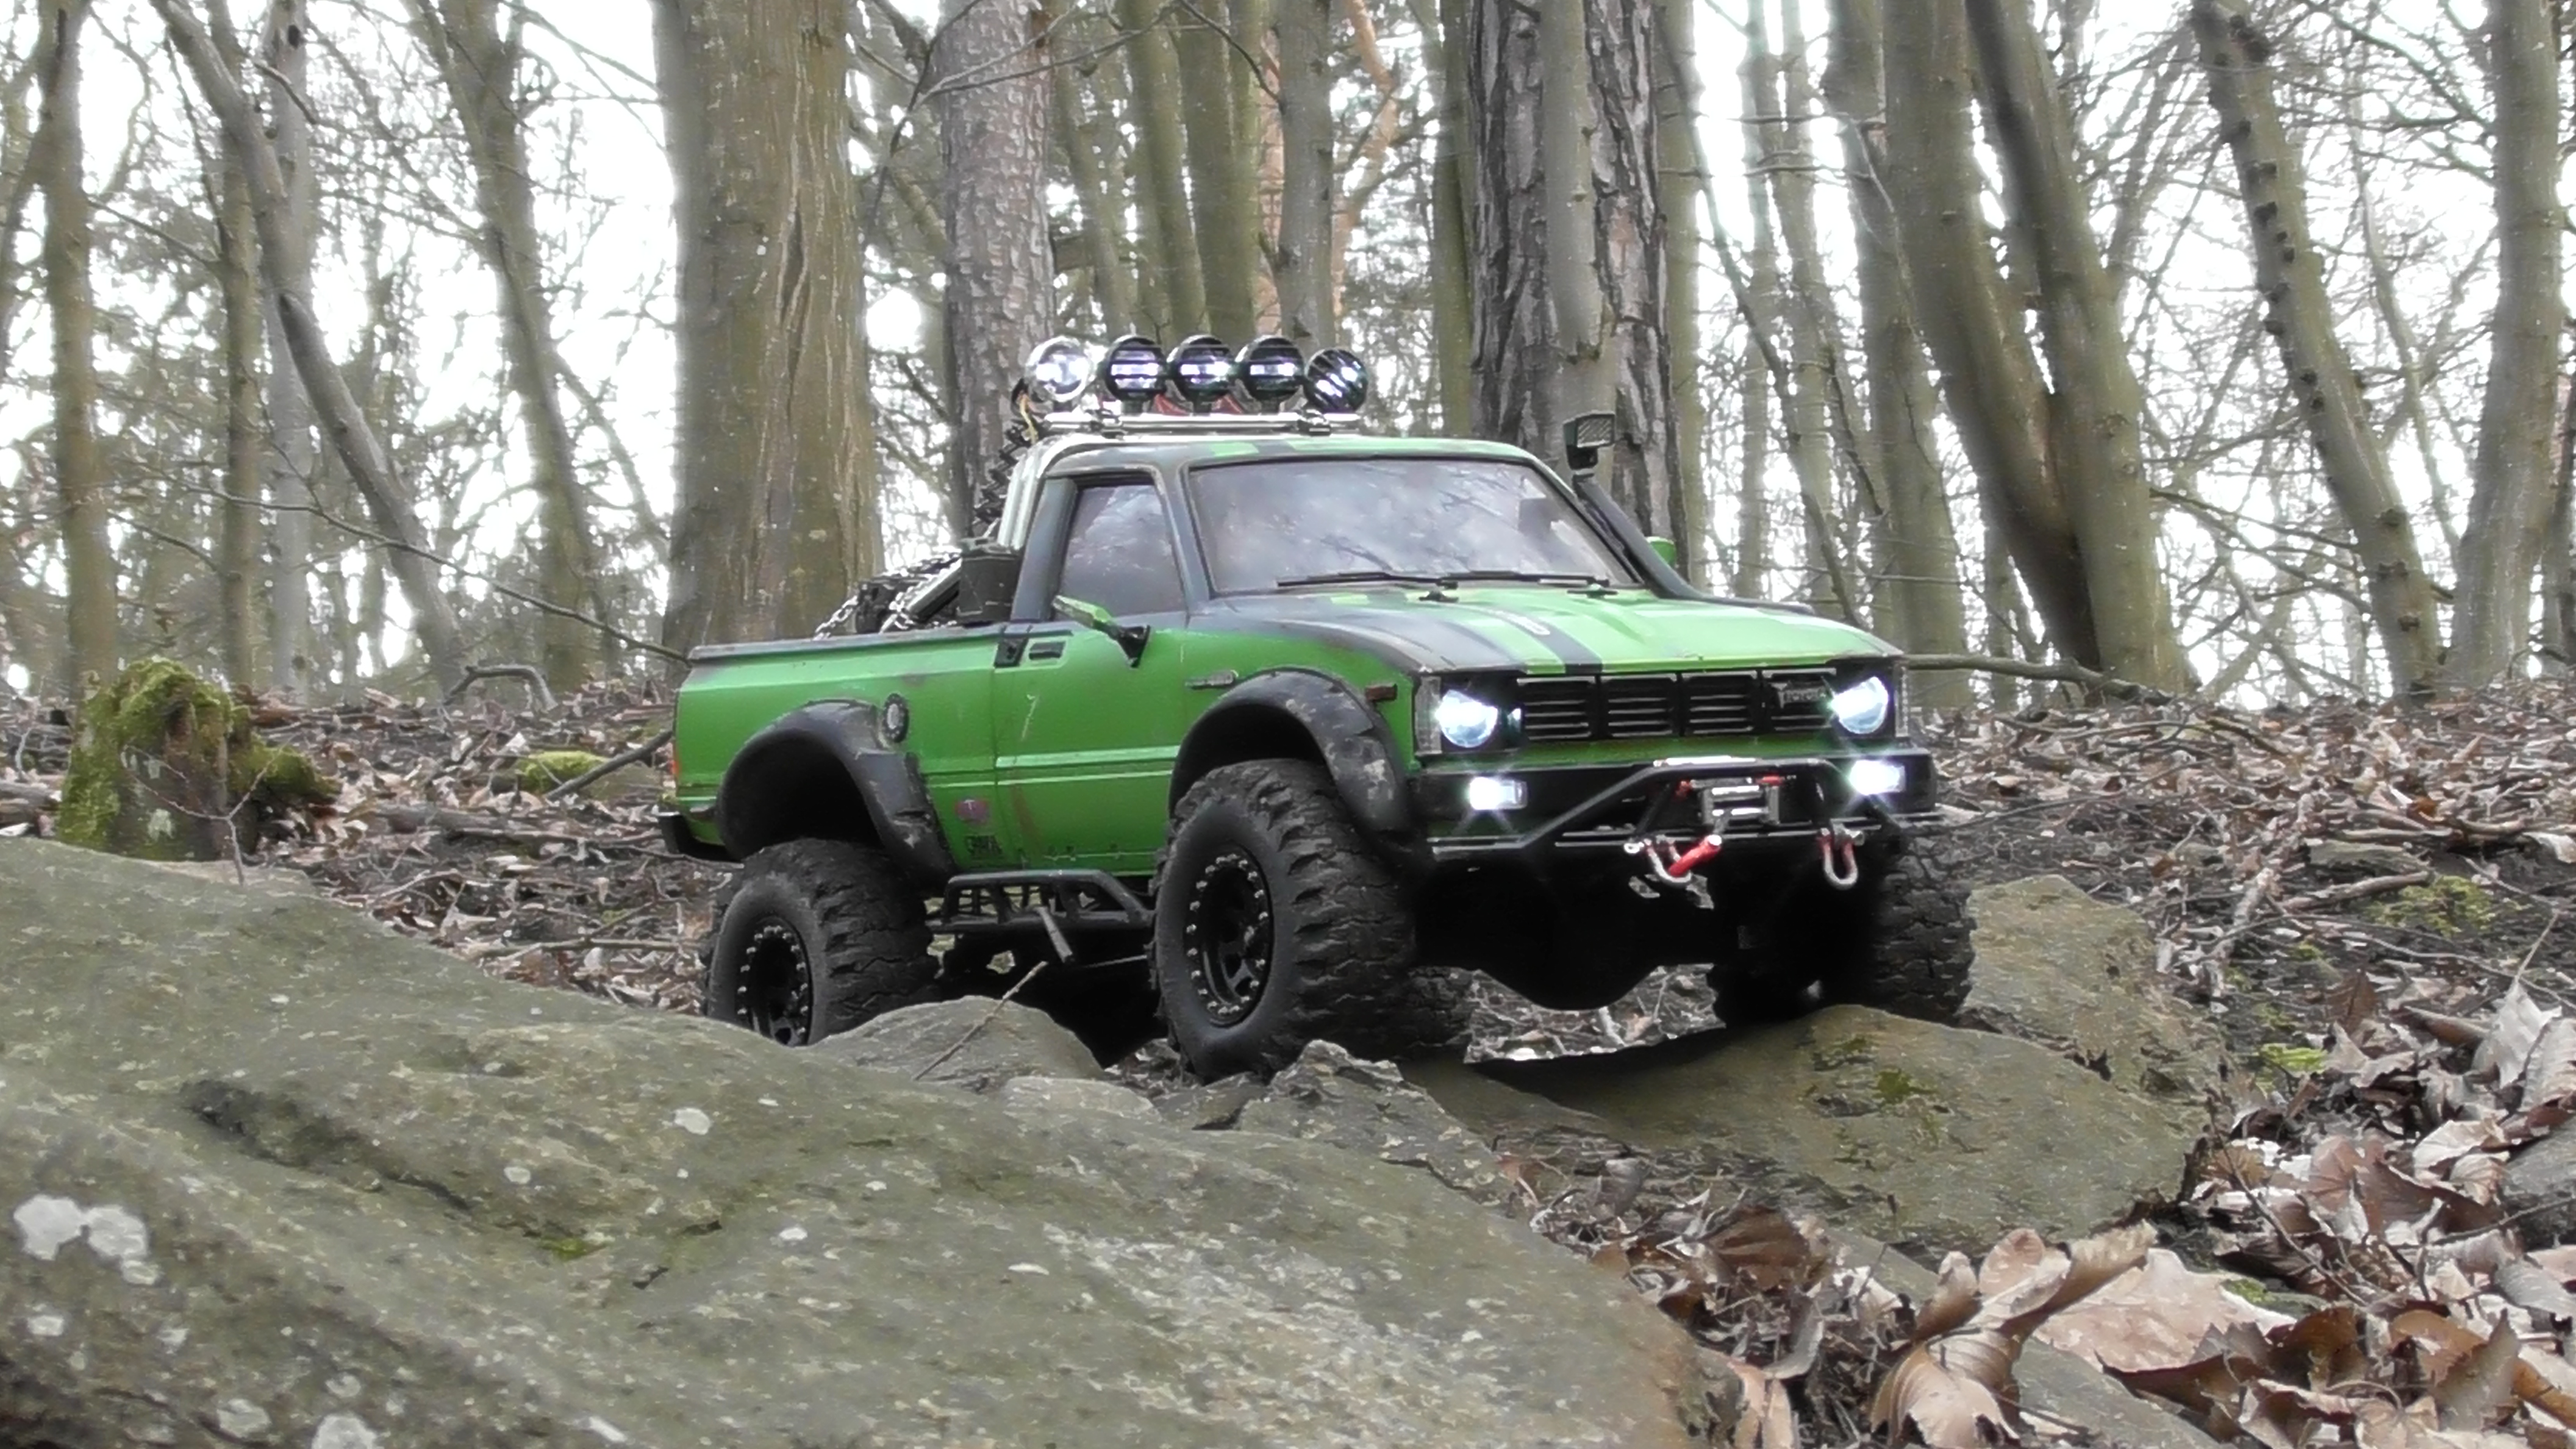 Axial Scx10 Toyota Hilux